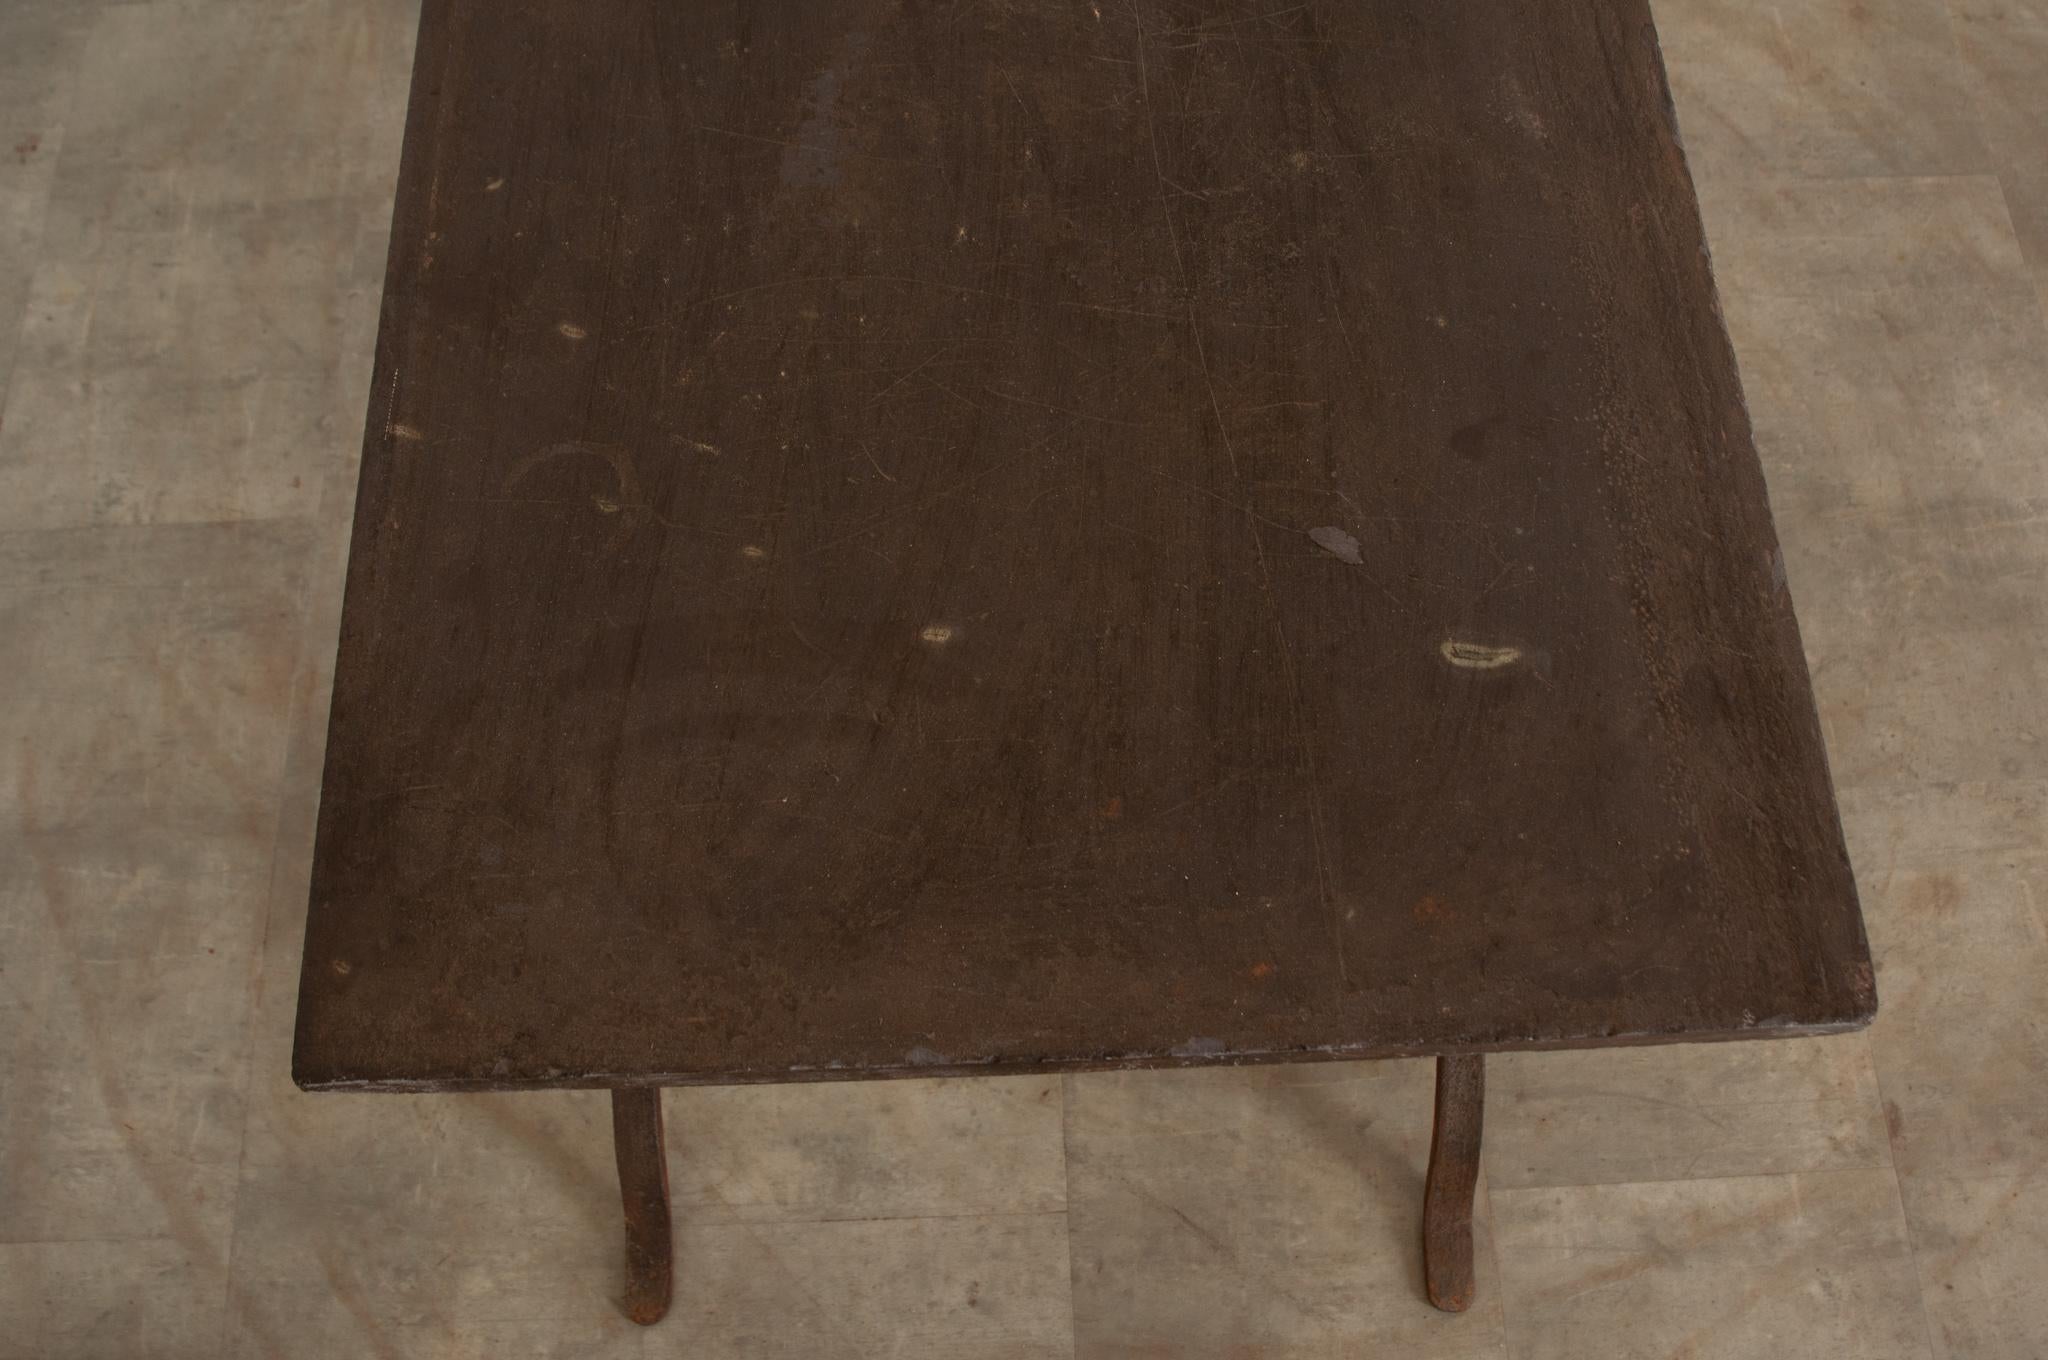 Fired English 19th Century Iron & Slate Work Table For Sale